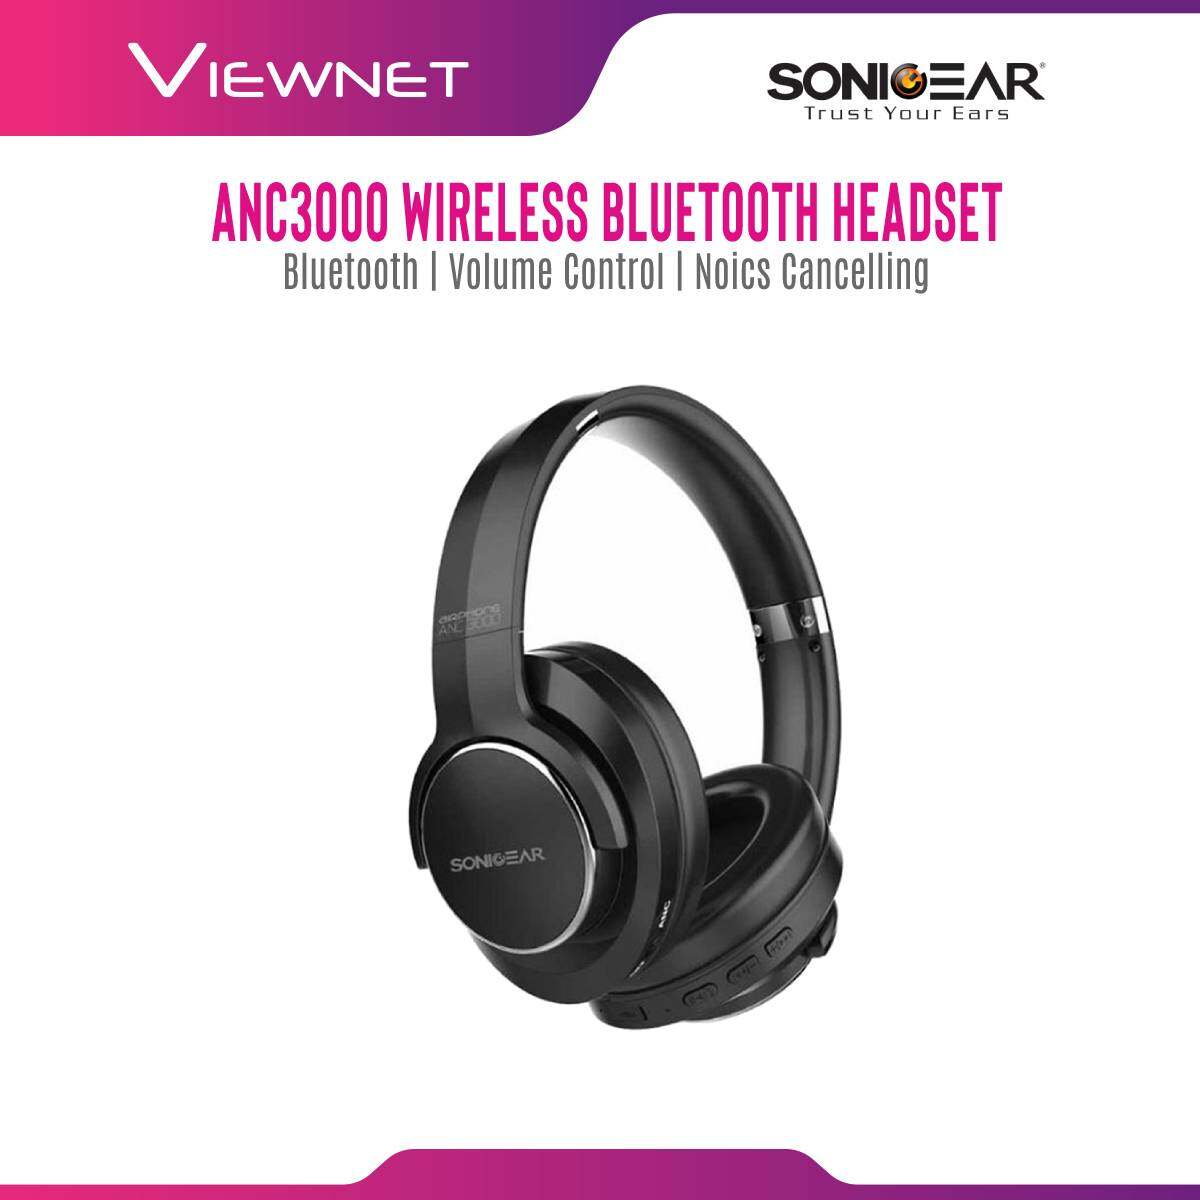 SonicGear Wireless Headset ANC3000 with Bluetooth 5.0, Up To 15 Hours Batery Life, 40MM Driver, Active Noise Cancelling, 3.5 Audio Jack, Side Button